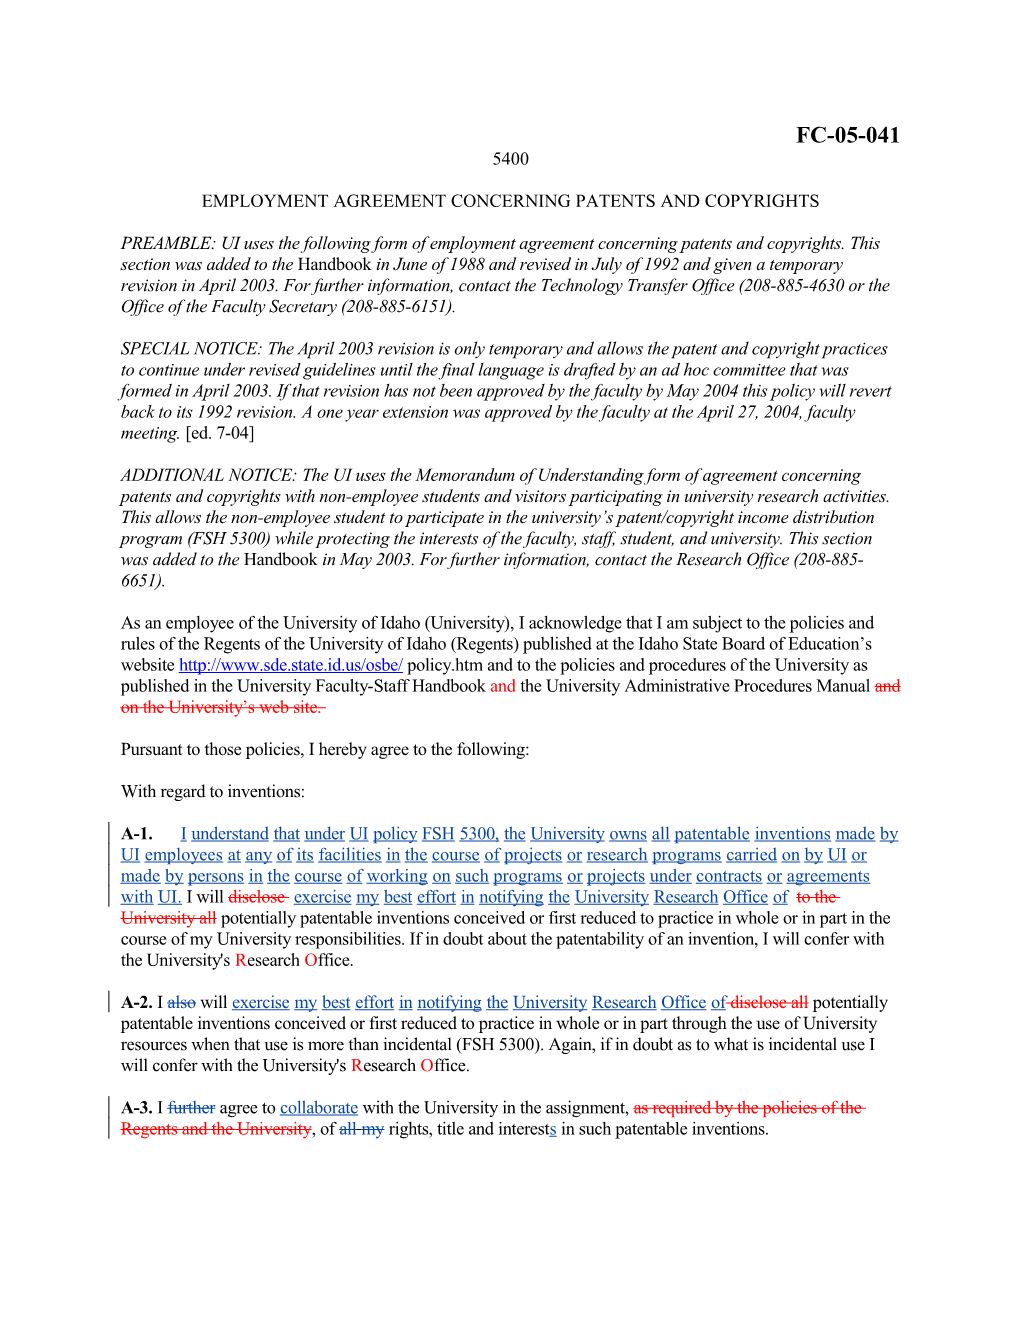 Employment Agreement Concerning Patents and Copyrights 5400